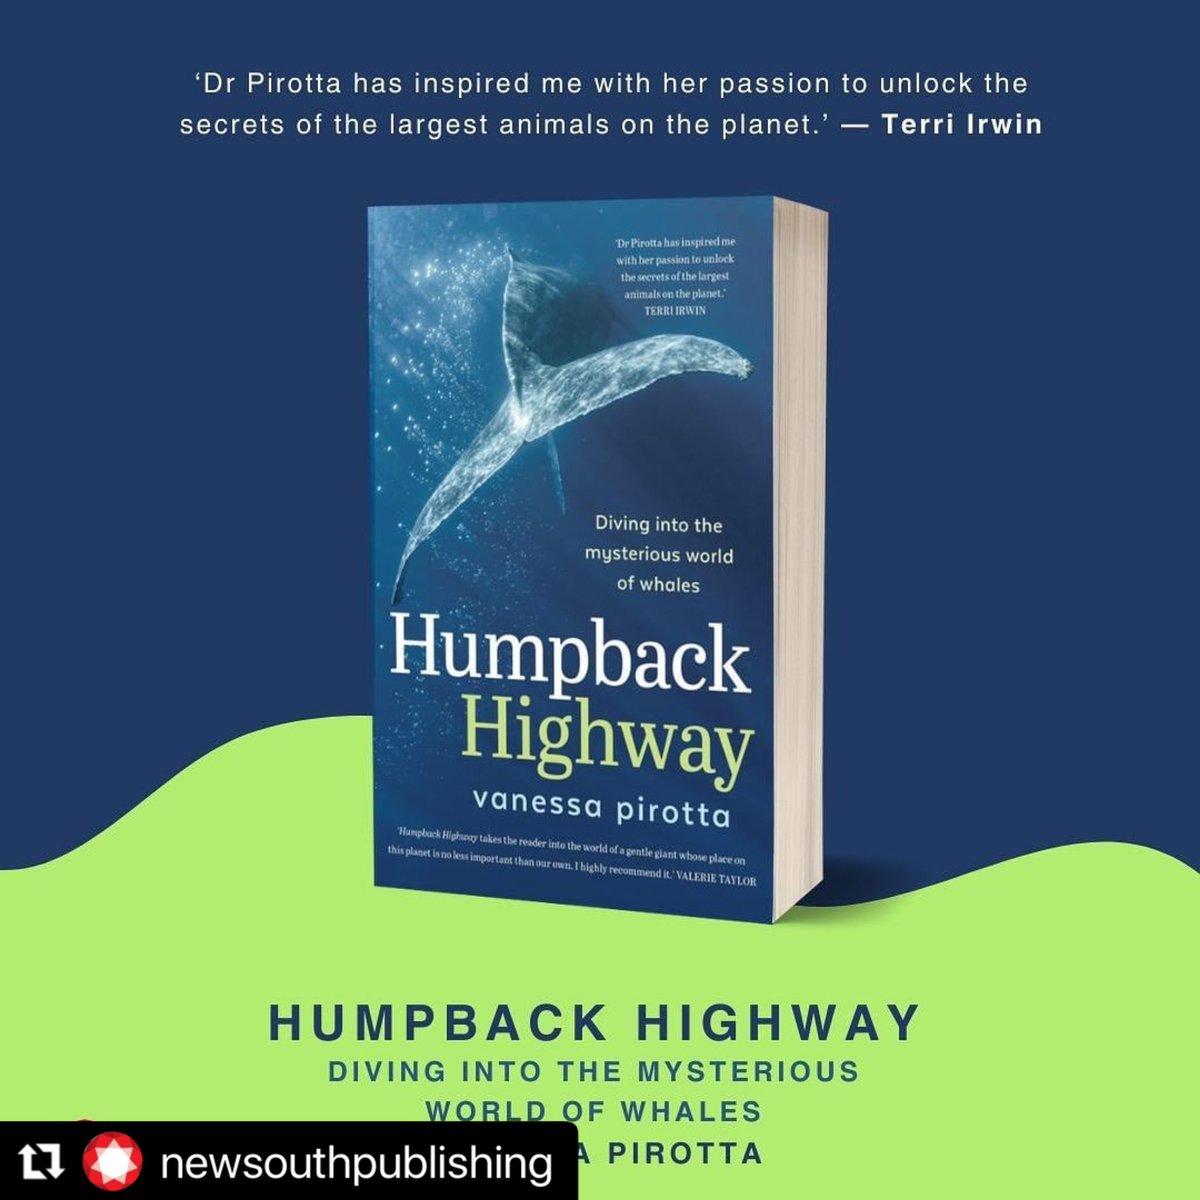 HERE IT IS! I’m yet to hold my book but I’m already so excited. A very special project with some AMAZING supporters of my work 🙏 (I’ll be announcing these shortly). Pre-order now via your local bookshop or here: unsw.press/books/humpback… #humpbackhighway #whaleon